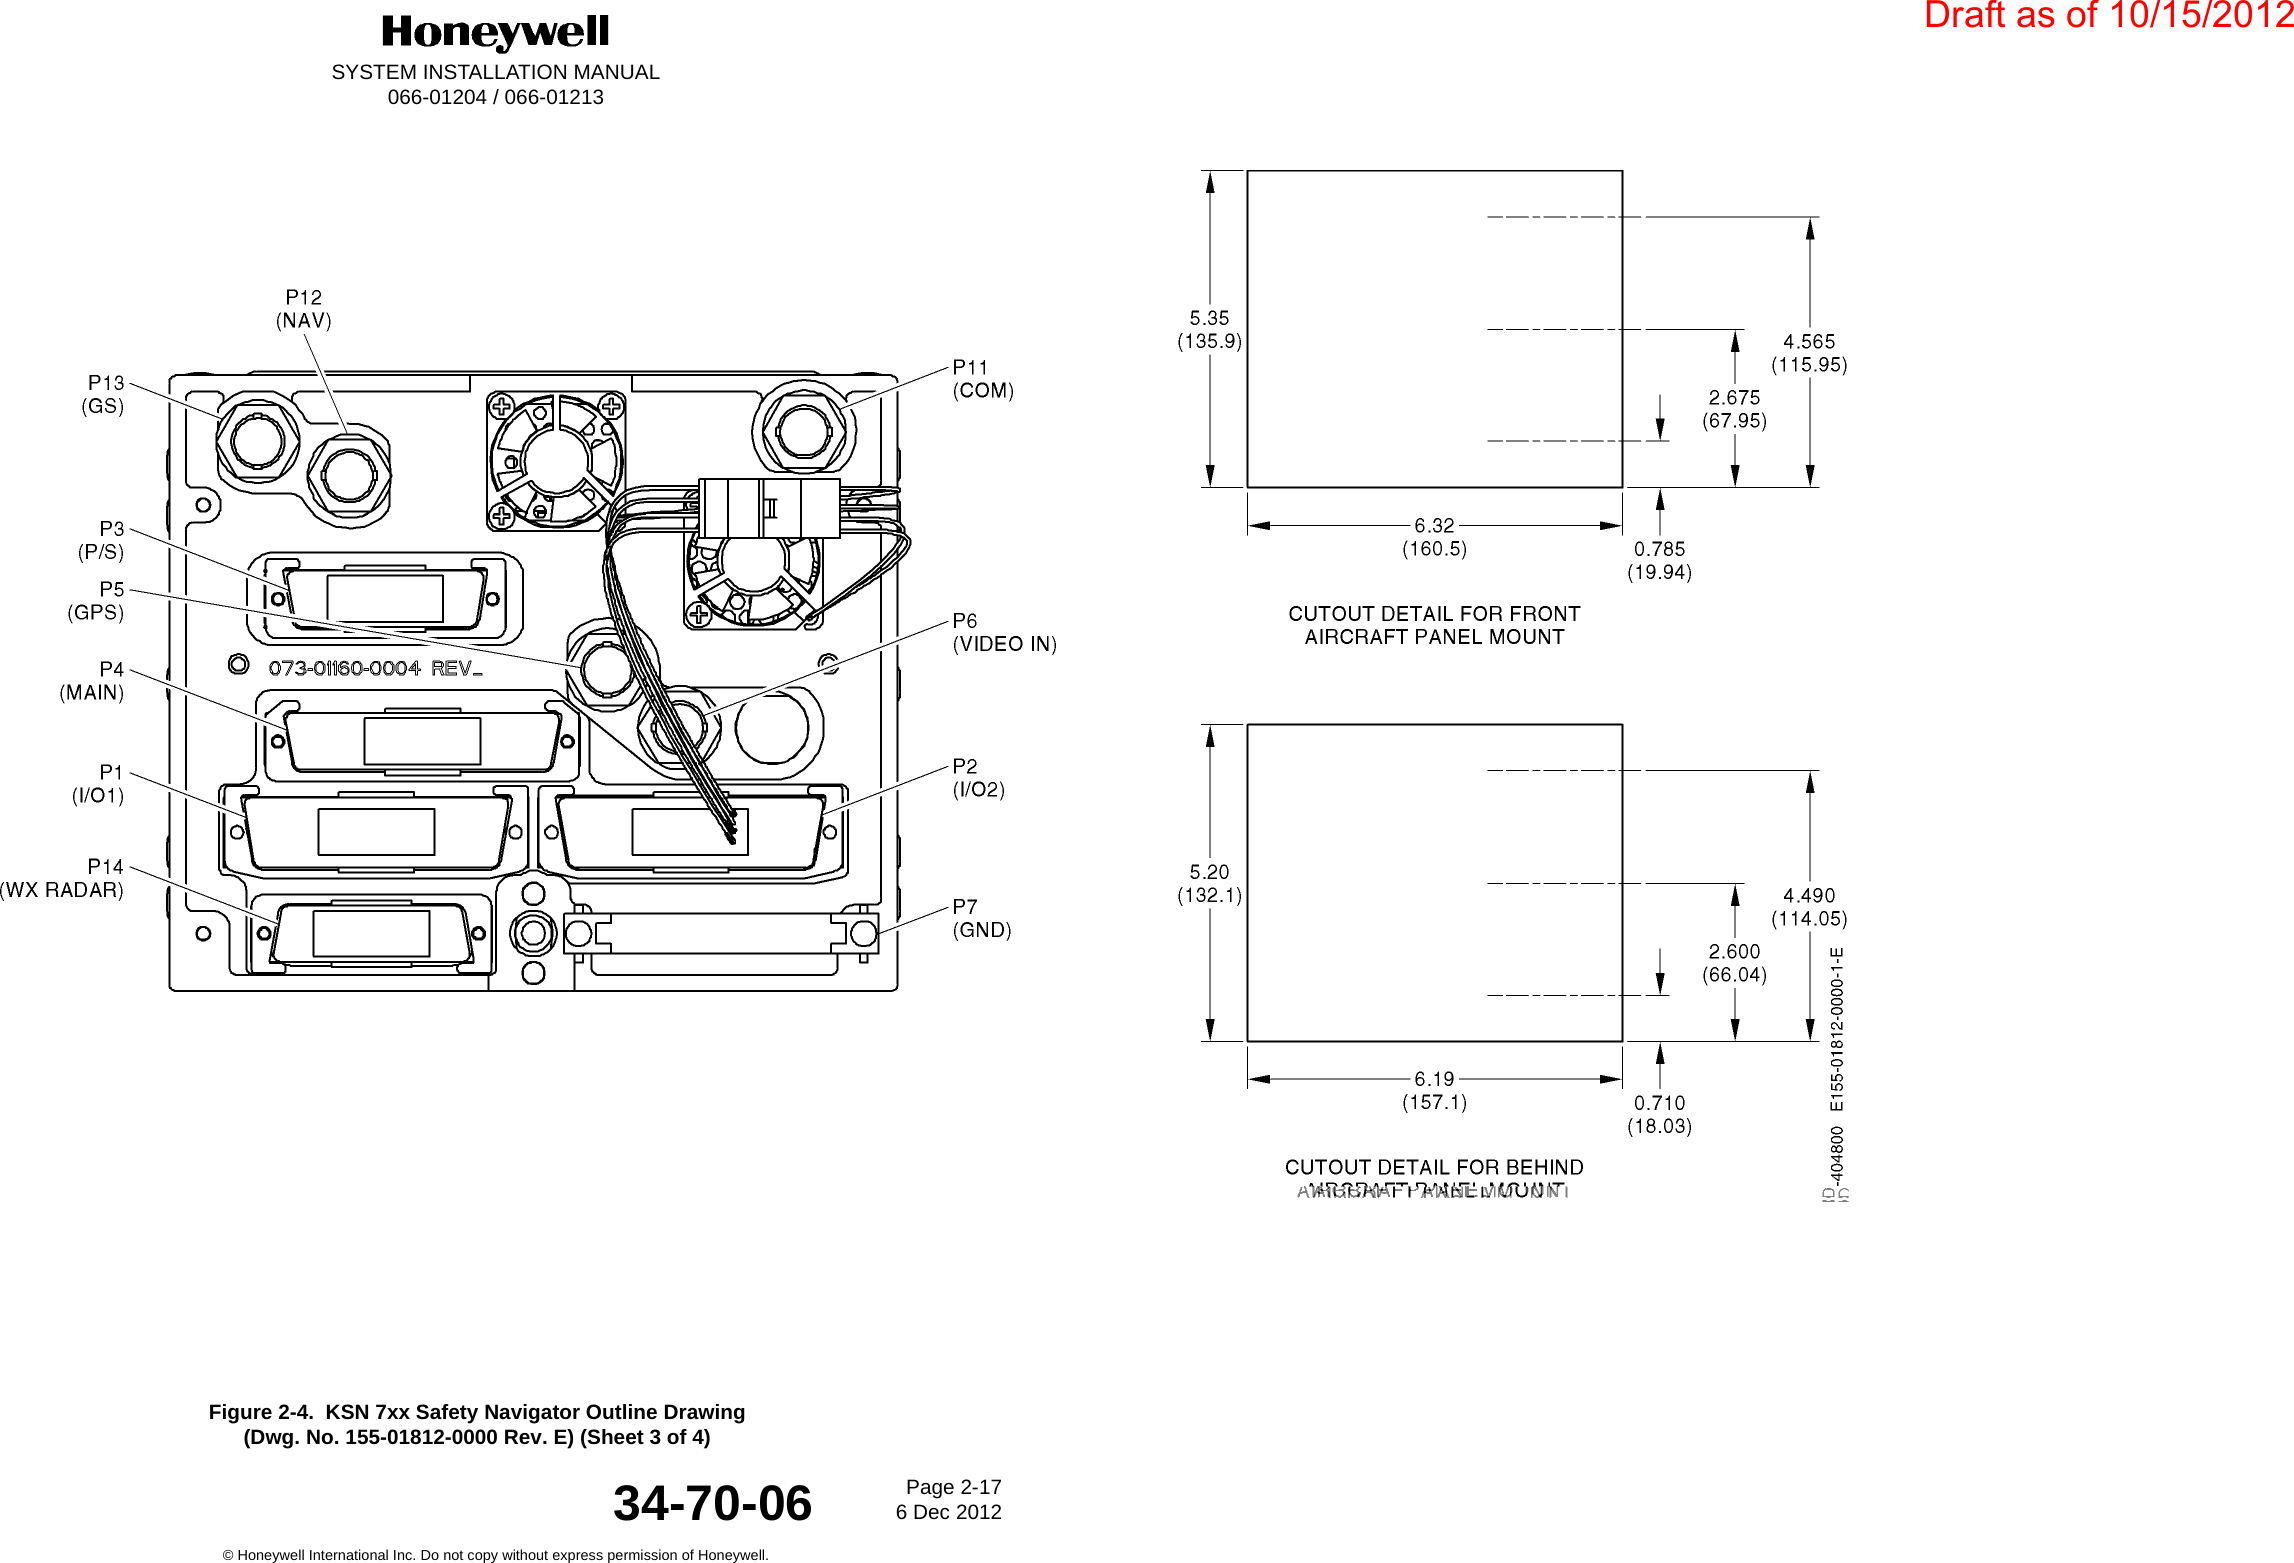 DraftSYSTEM INSTALLATION MANUAL066-01204 / 066-01213Page 2-176 Dec 2012© Honeywell International Inc. Do not copy without express permission of Honeywell.34-70-06Figure 2-4.  KSN 7xx Safety Navigator Outline Drawing(Dwg. No. 155-01812-0000 Rev. E) (Sheet 3 of 4)Draft as of 10/15/2012